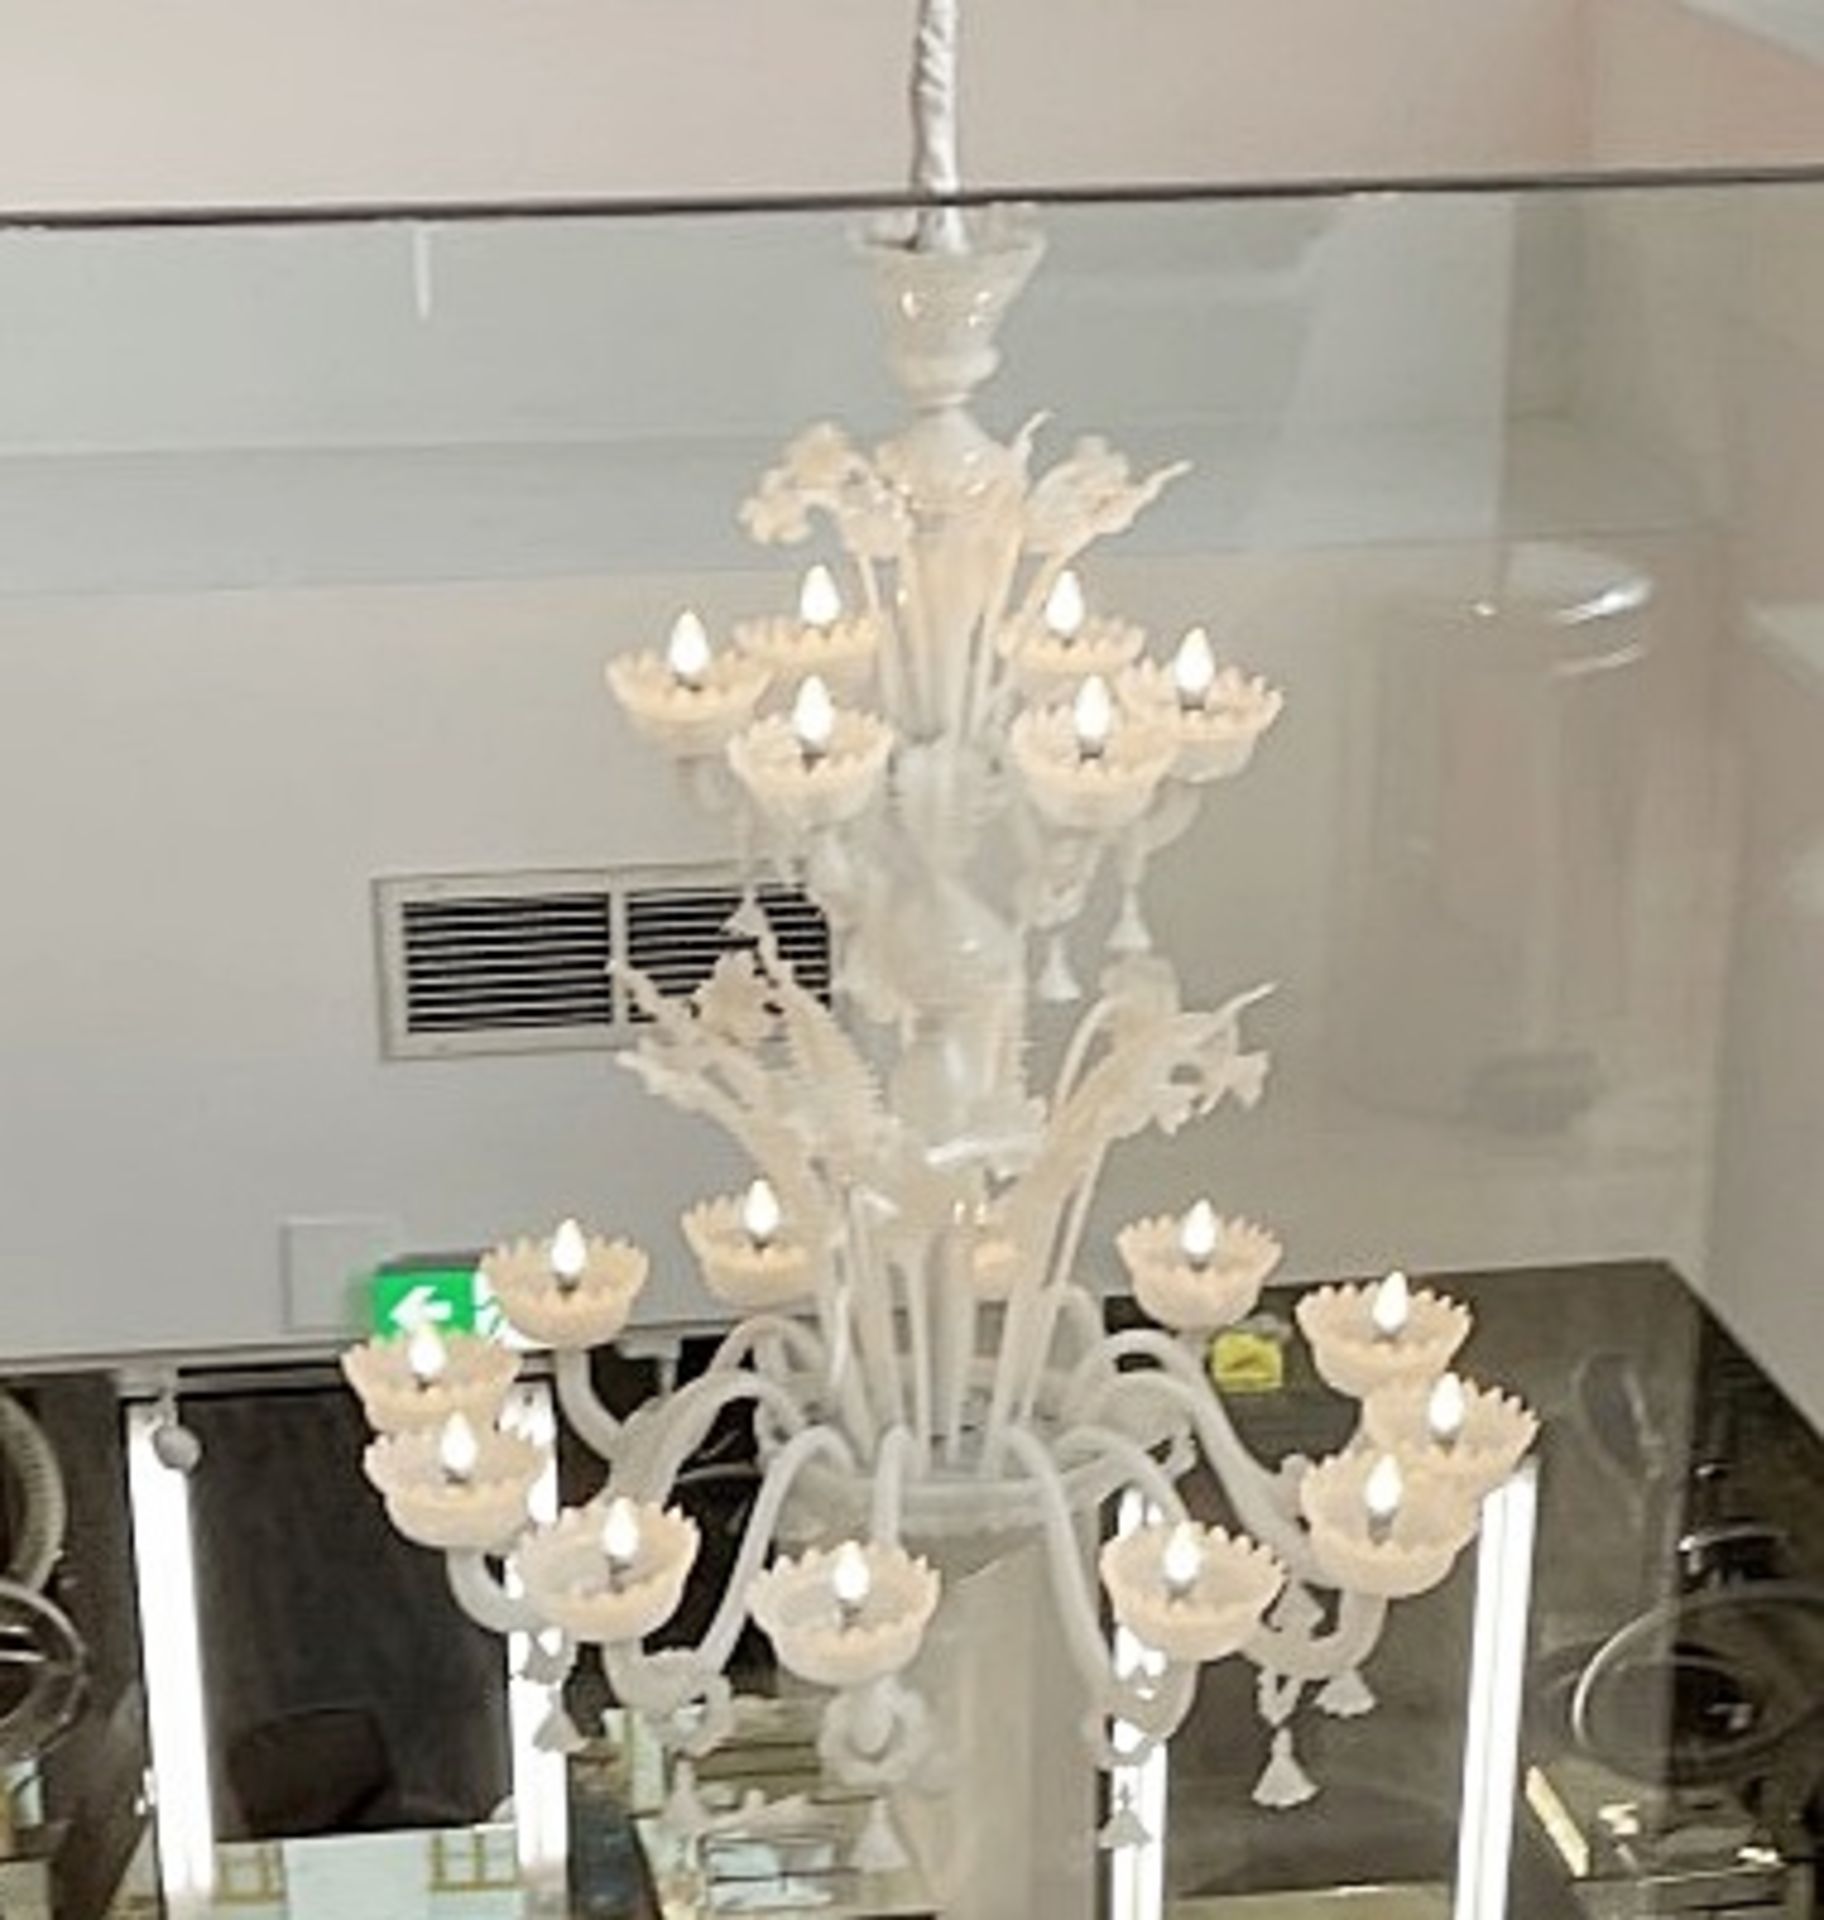 1 x Huge 1.8 Metre Tall Handcrafted 18-Arm Opal Glass Chandelier - Stunning Item - Ref: MHB137 - - Image 7 of 12